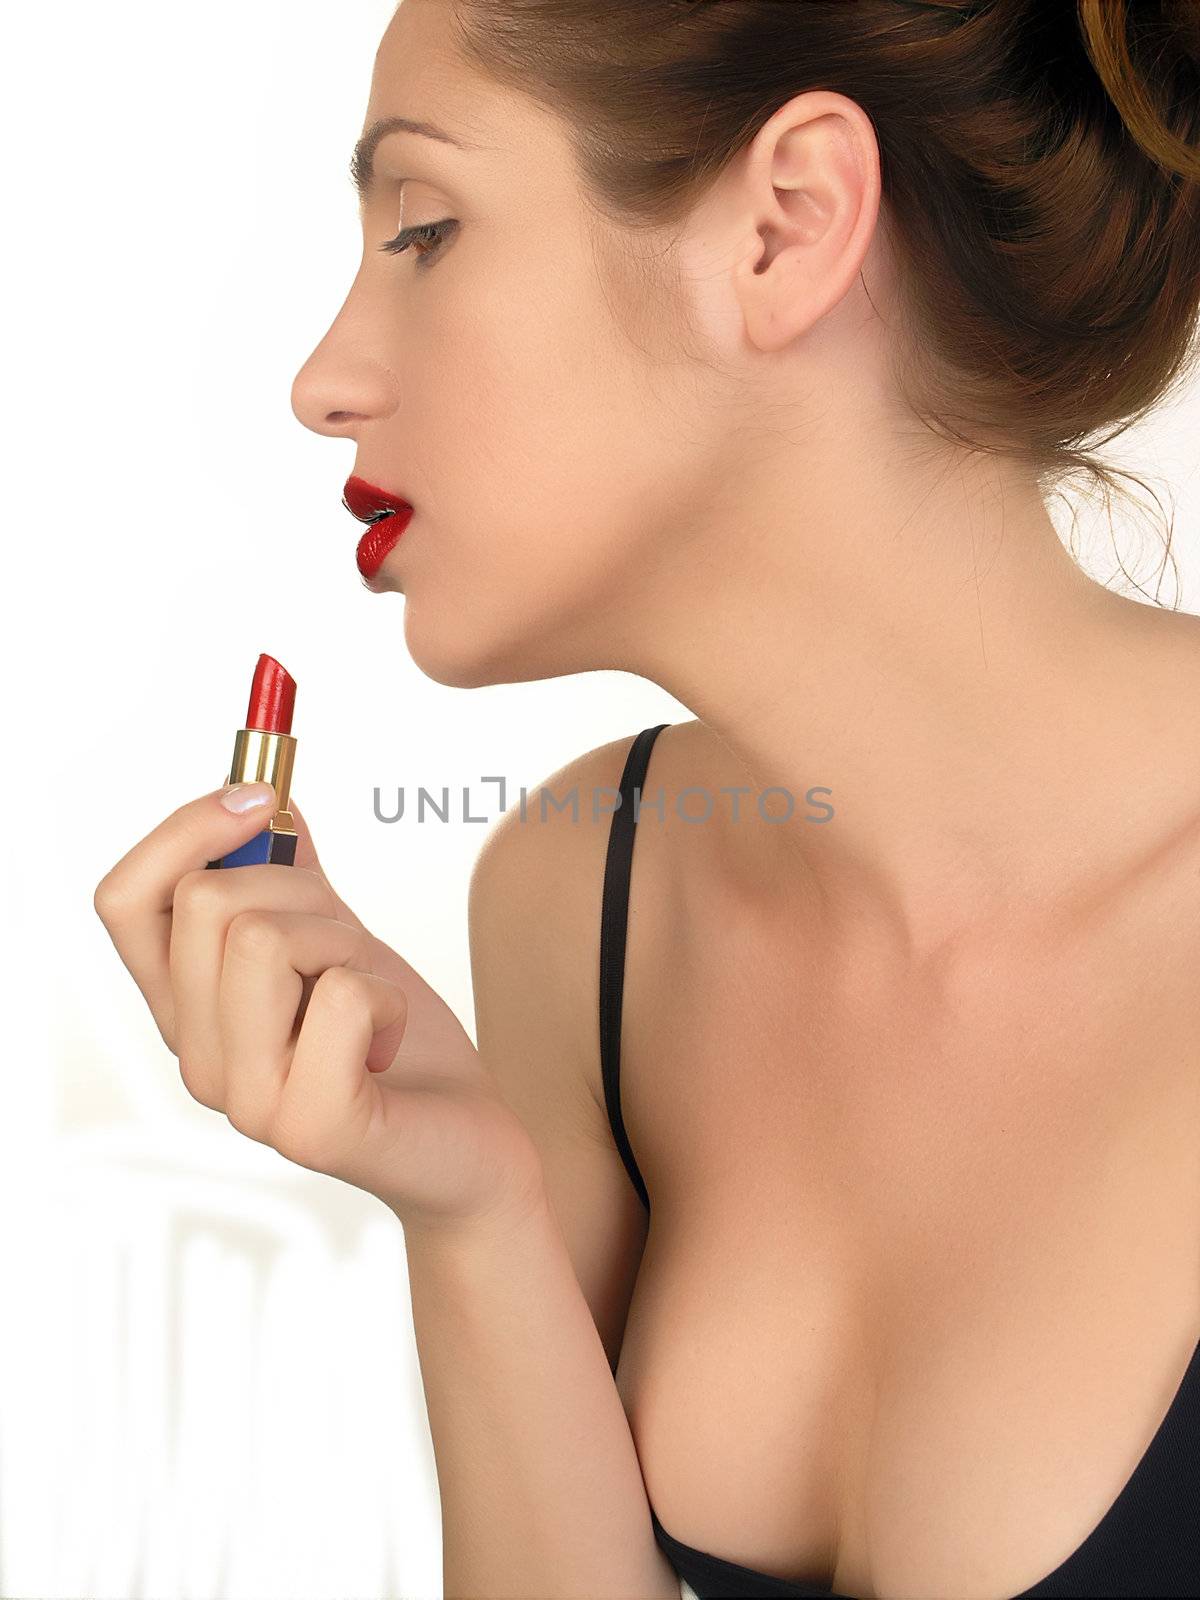 Lipstick in Hand, Profile by adamr